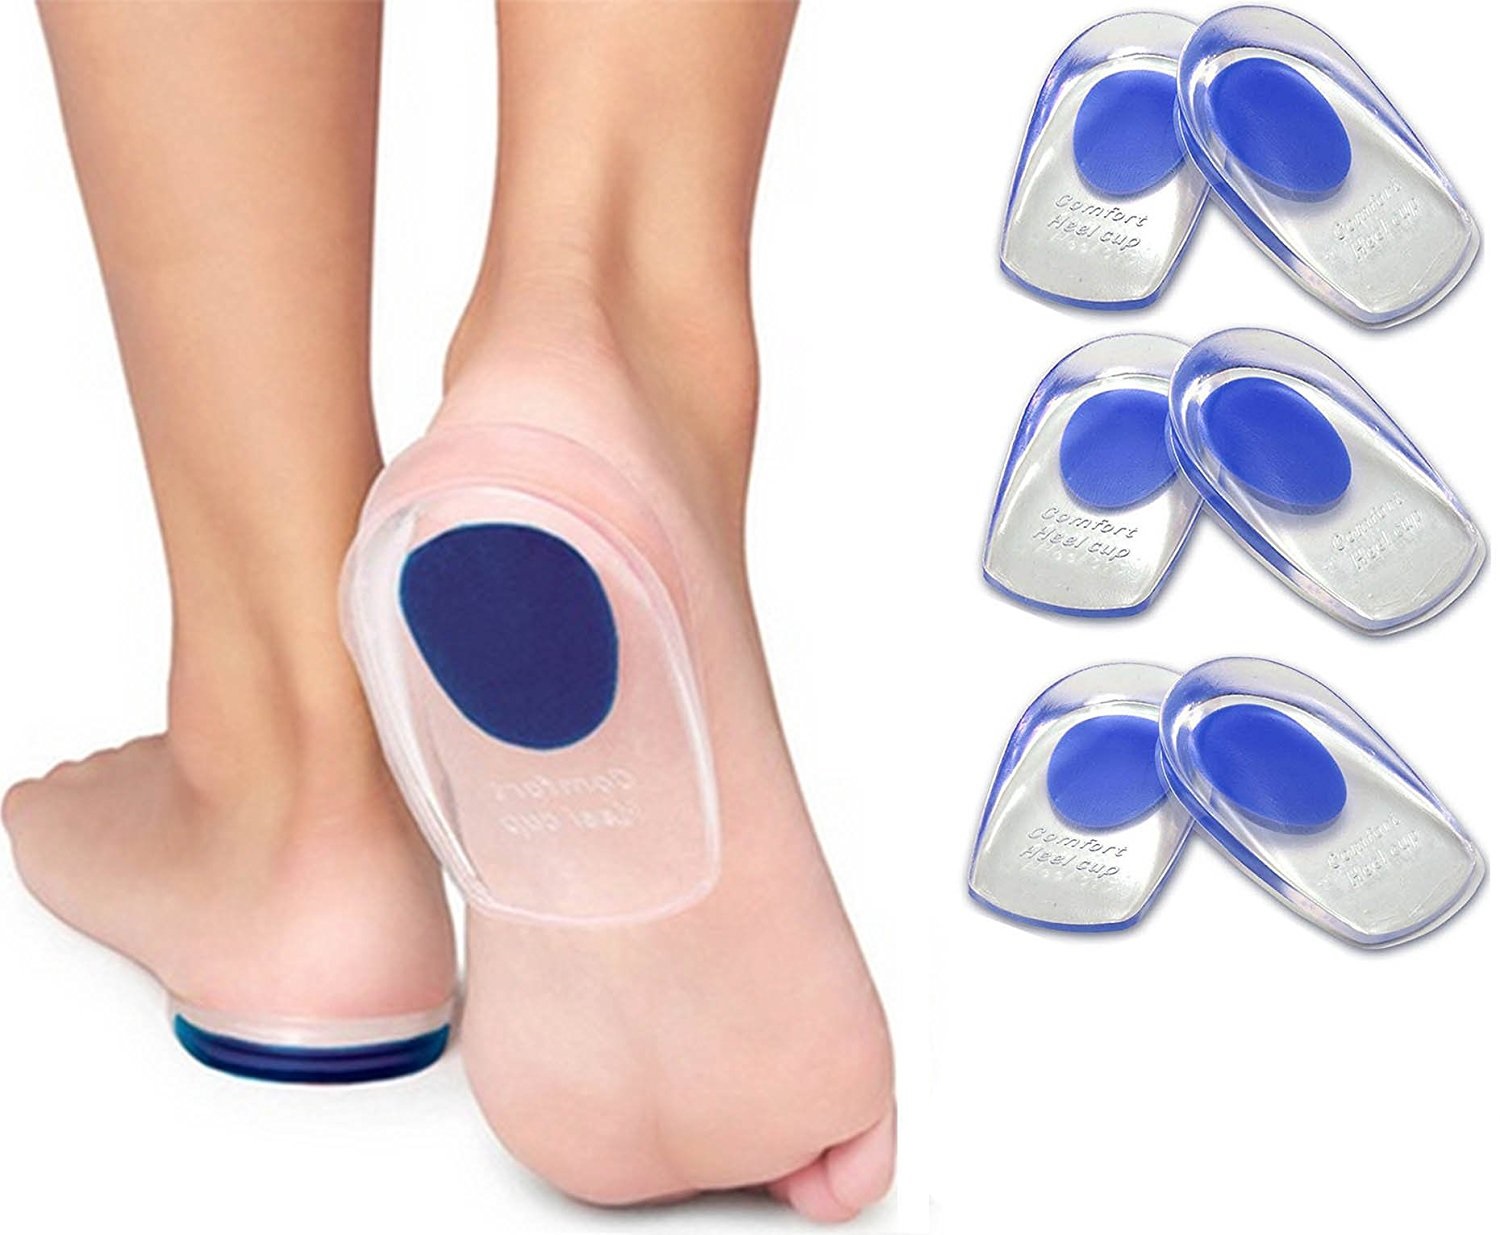 Foot Blister Prevention & Treatment - heel pads